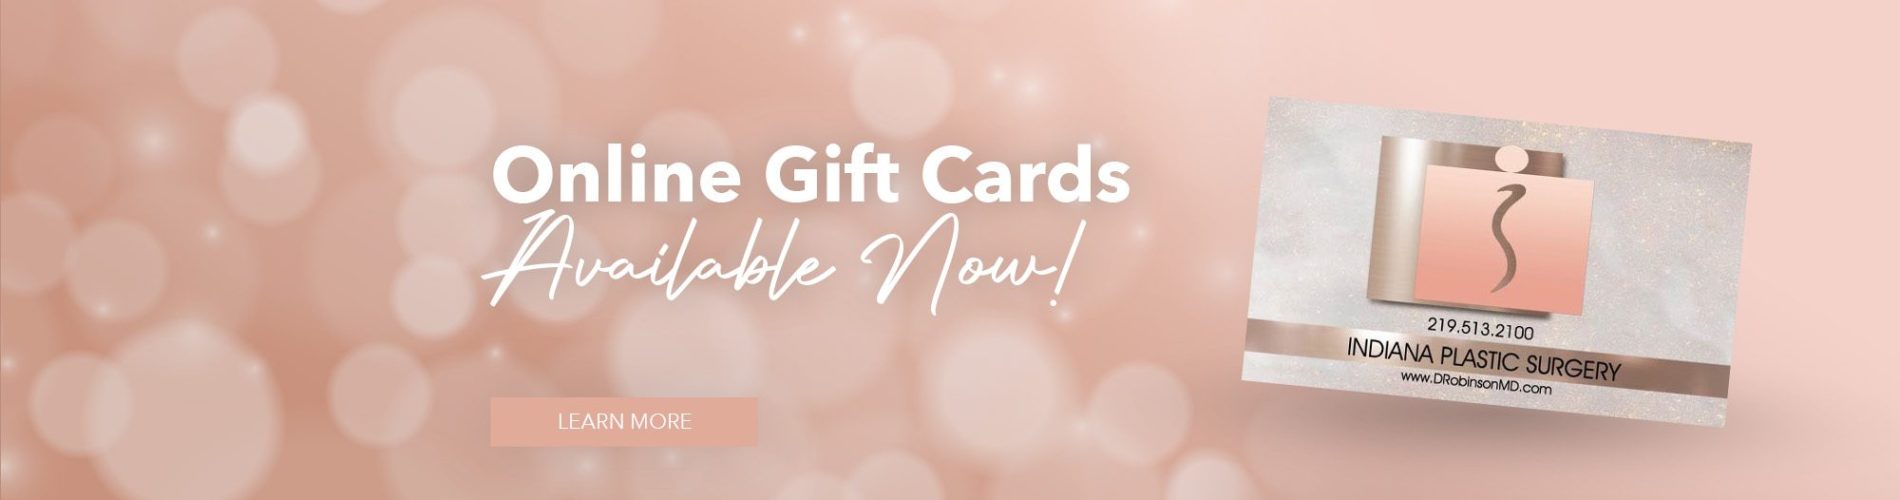 Gift Cards at Indiana Plastic Surgery